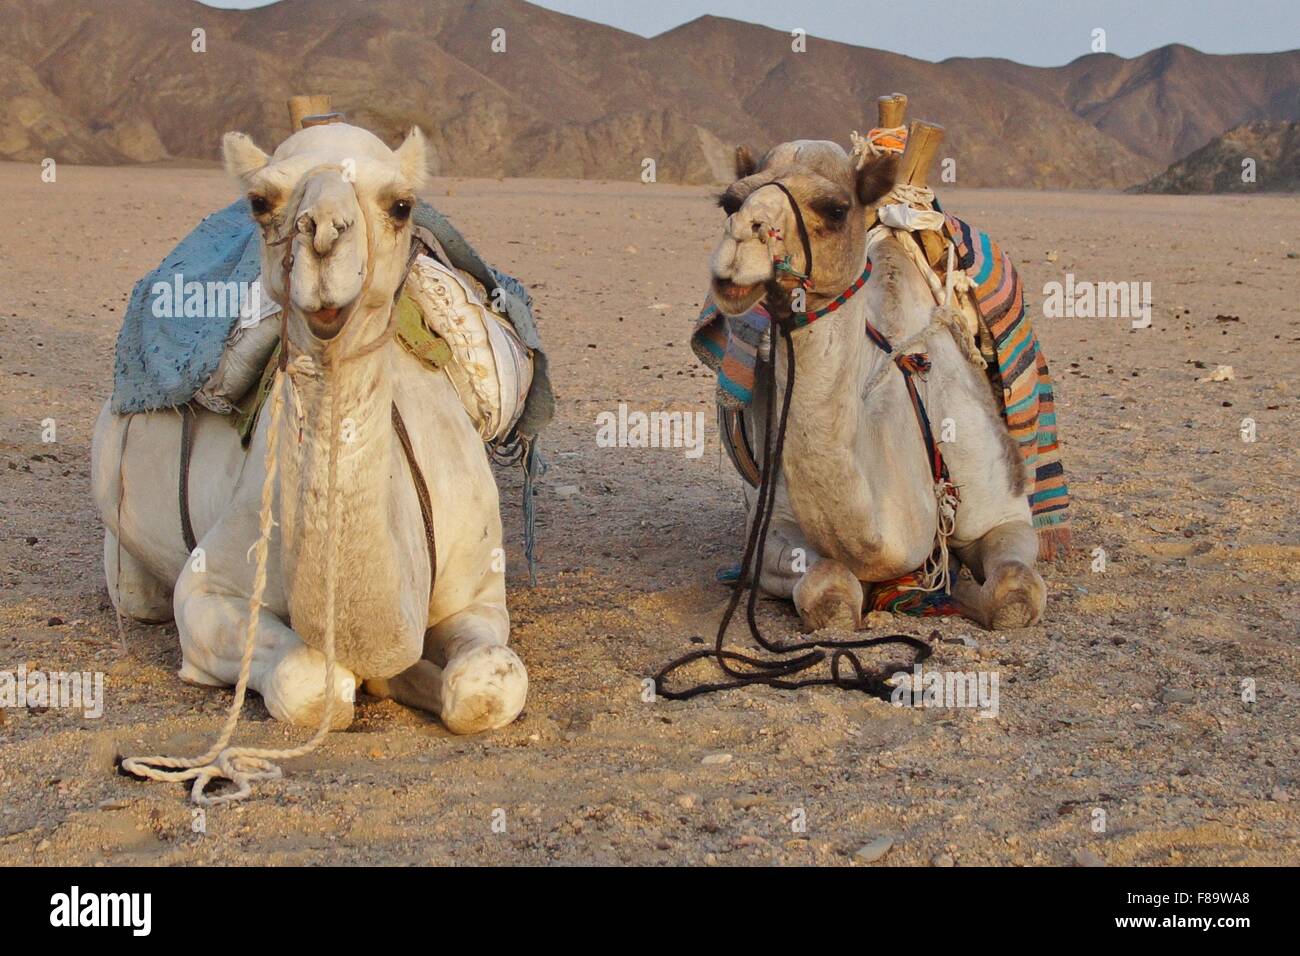 Pair of camels laying down together in the desert Stock Photo